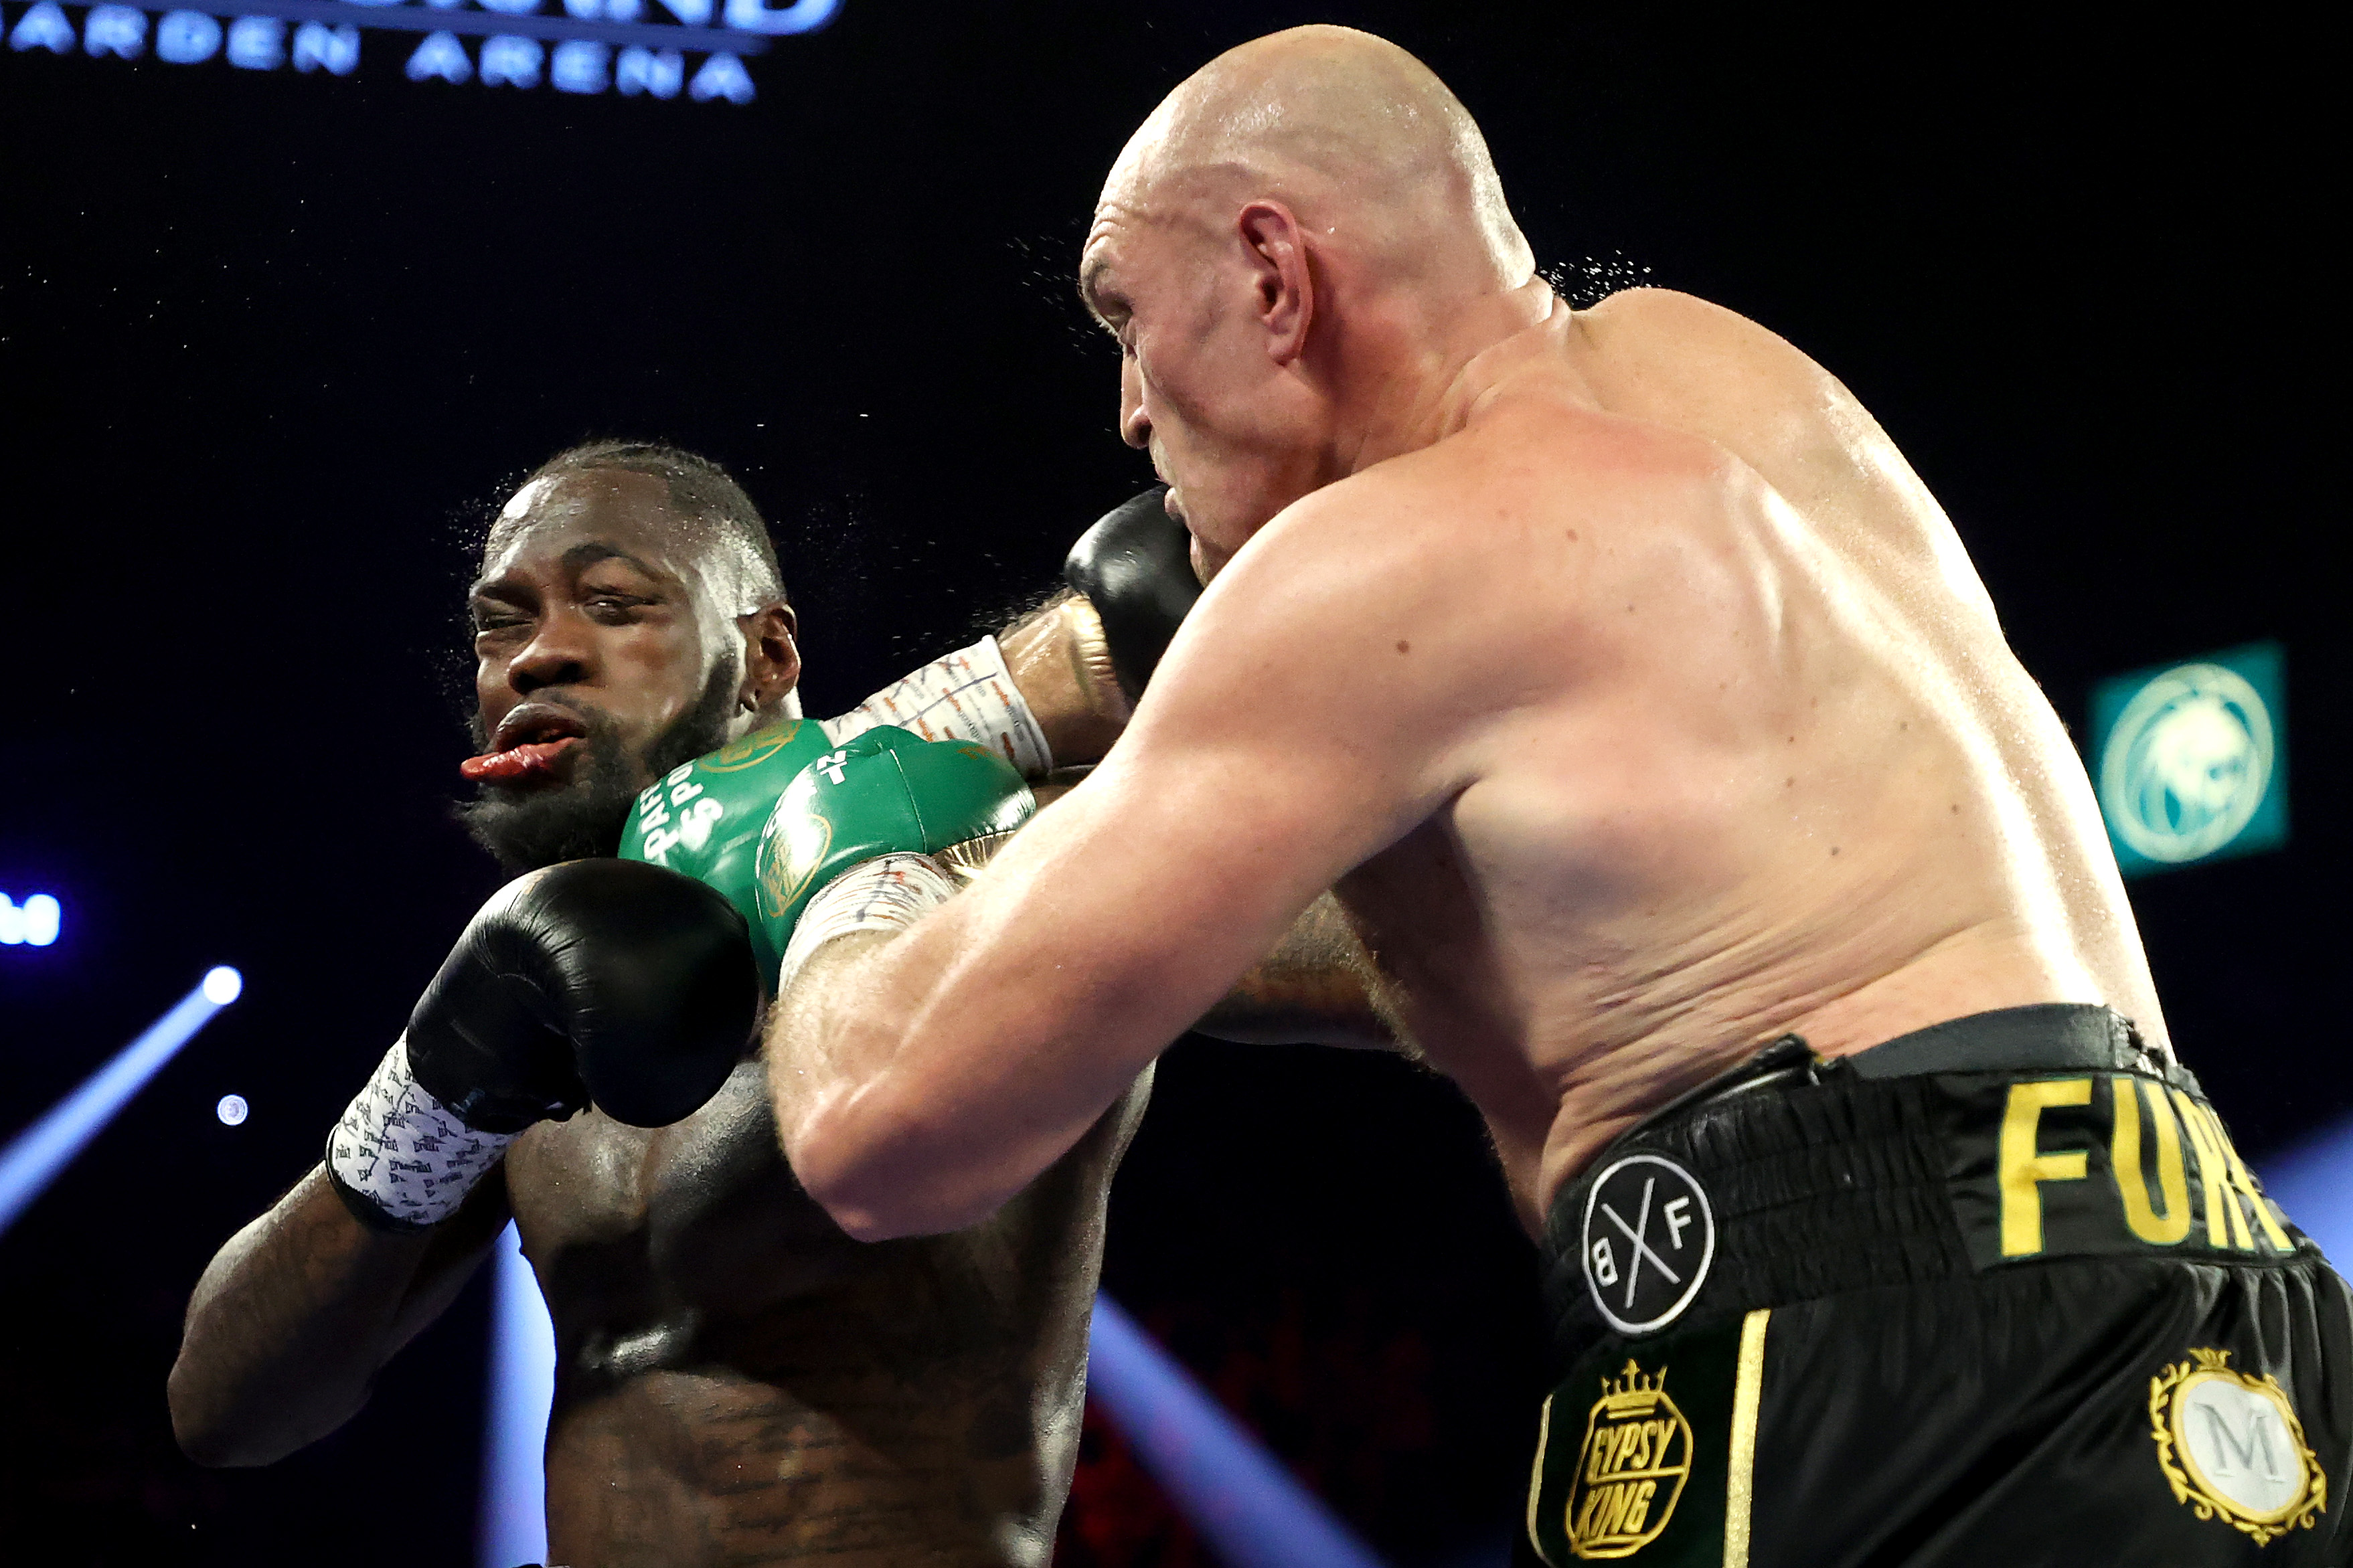 Who Won the Fight Last Night? Tyson Fury vs Deontay Wilder Result, Fight Time, How to Watch and Fight Card FanDuel Research